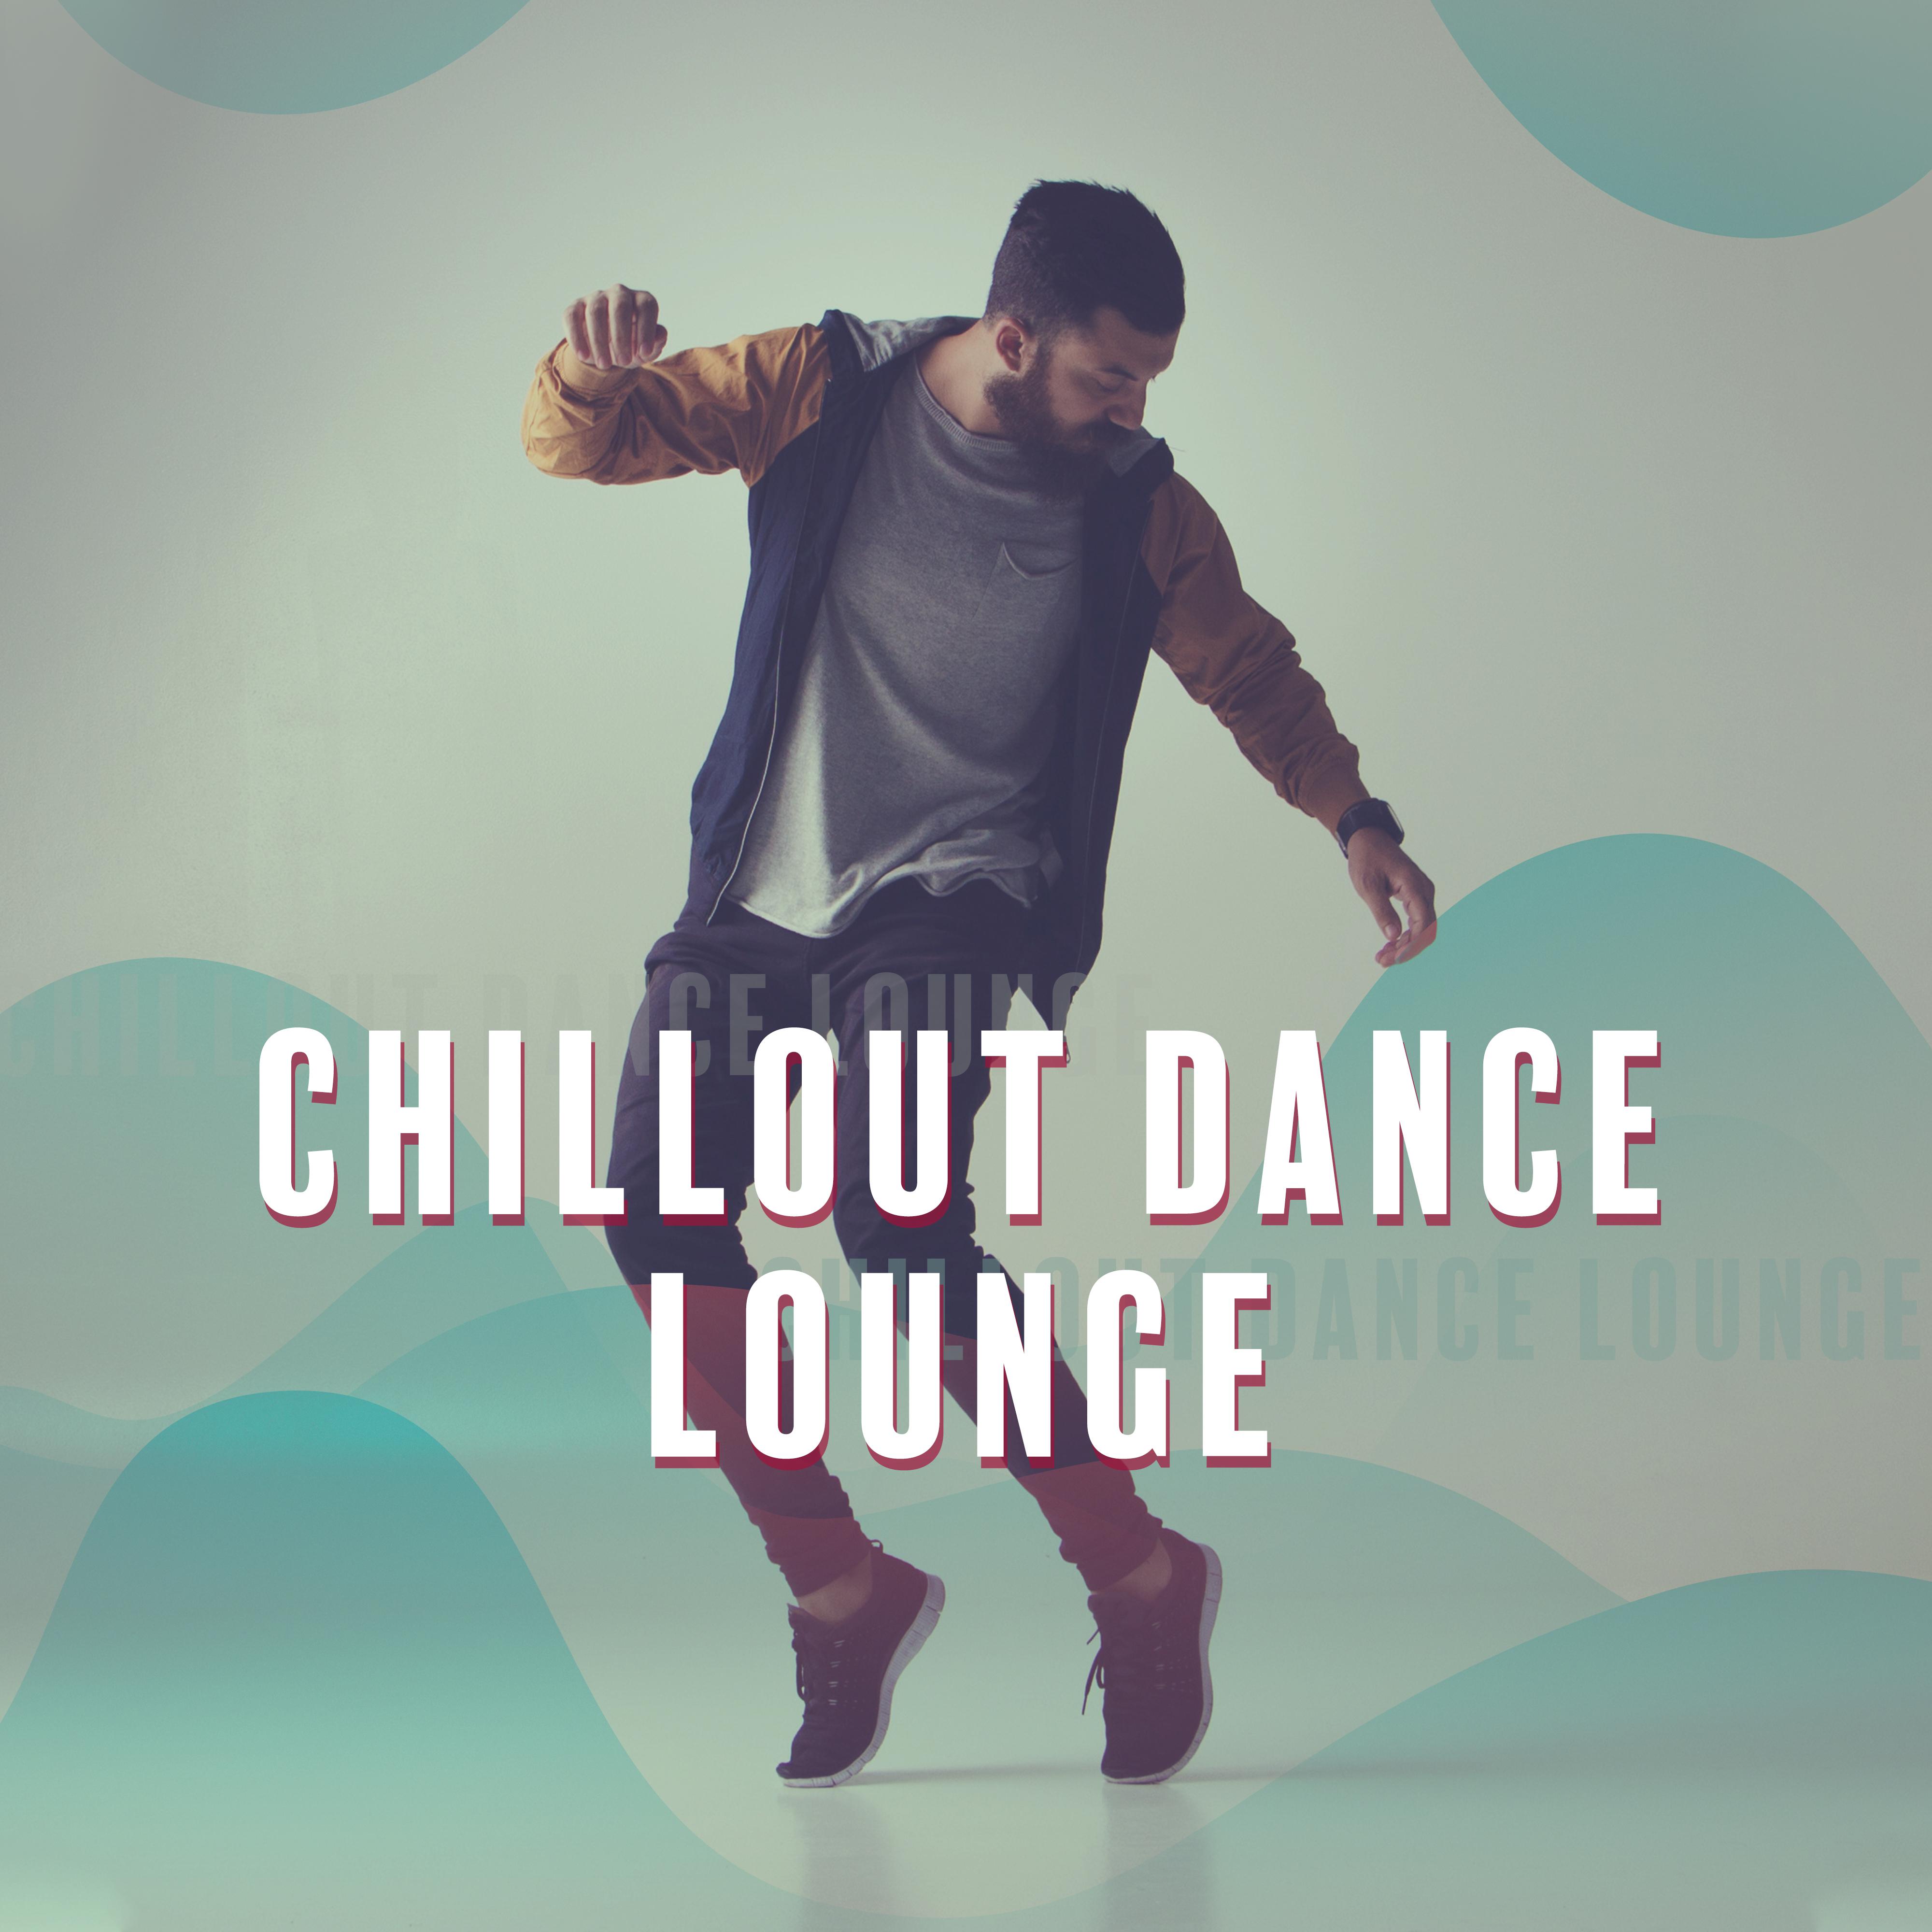 Chillout Dance Lounge – Party Hits 2019, Relaxing Ambient Chillout, Music Zone, Ibiza Dance Party, Summer Mix, Best of Ibiza, Beach Chillout